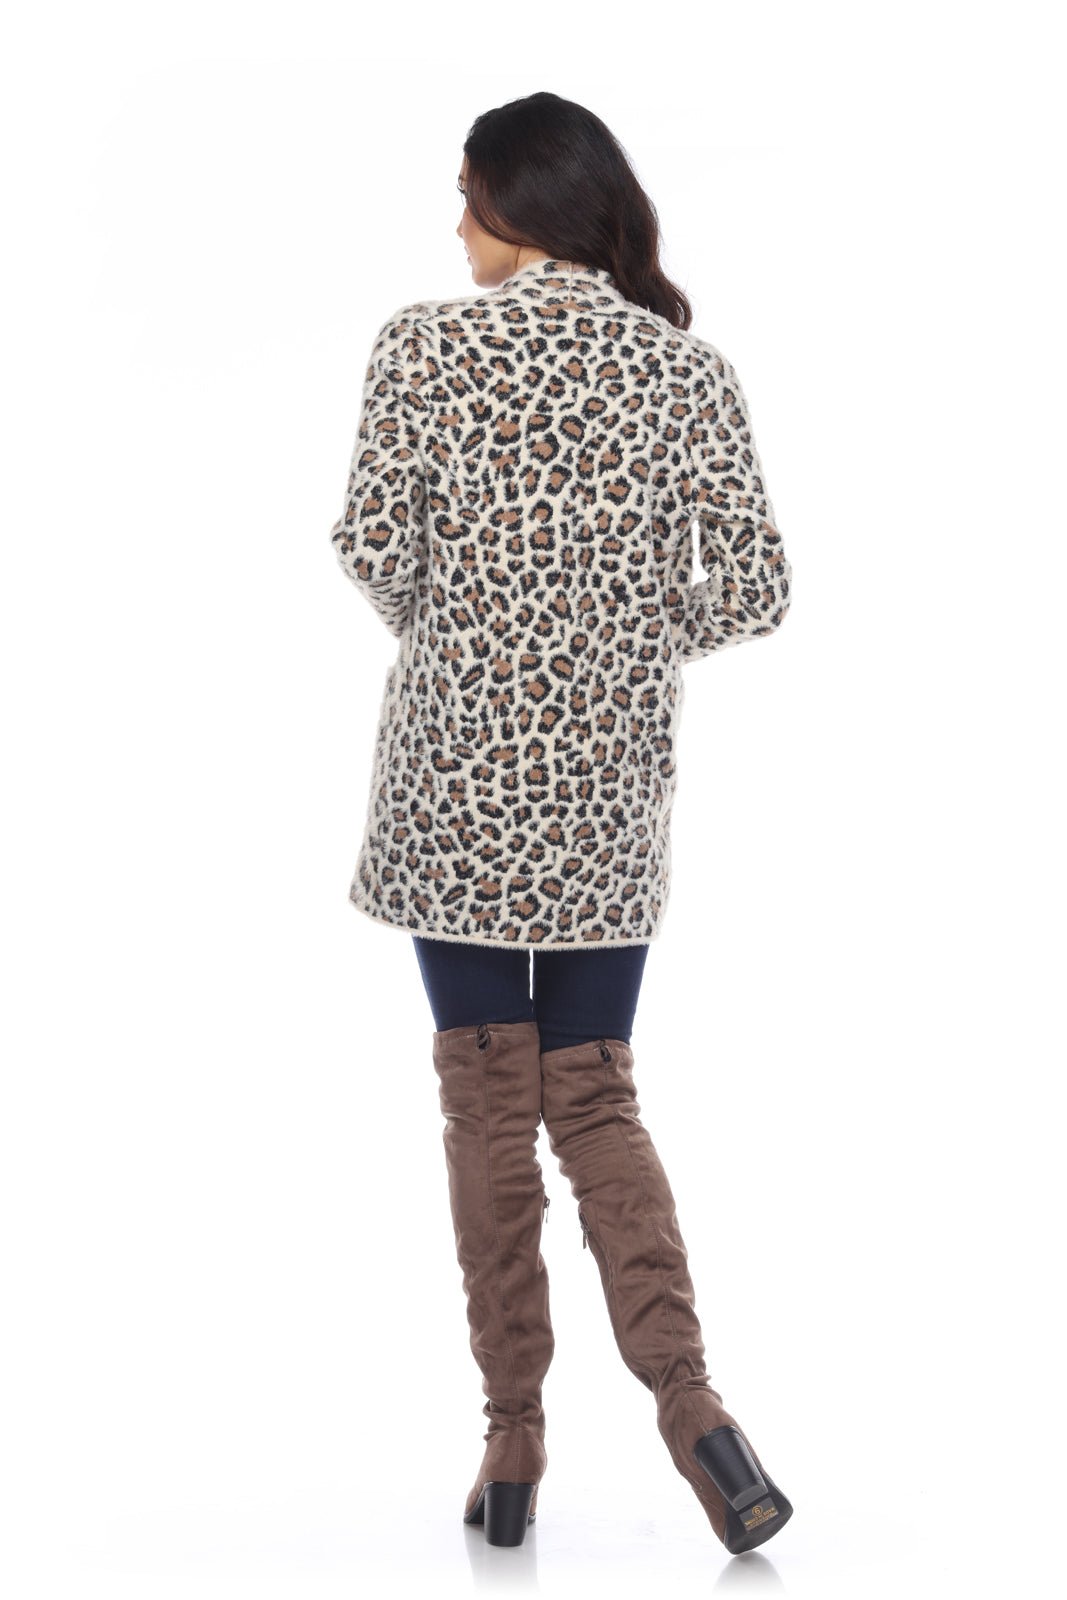 Leopard Print Open Front Sweater - Kamana Clothing